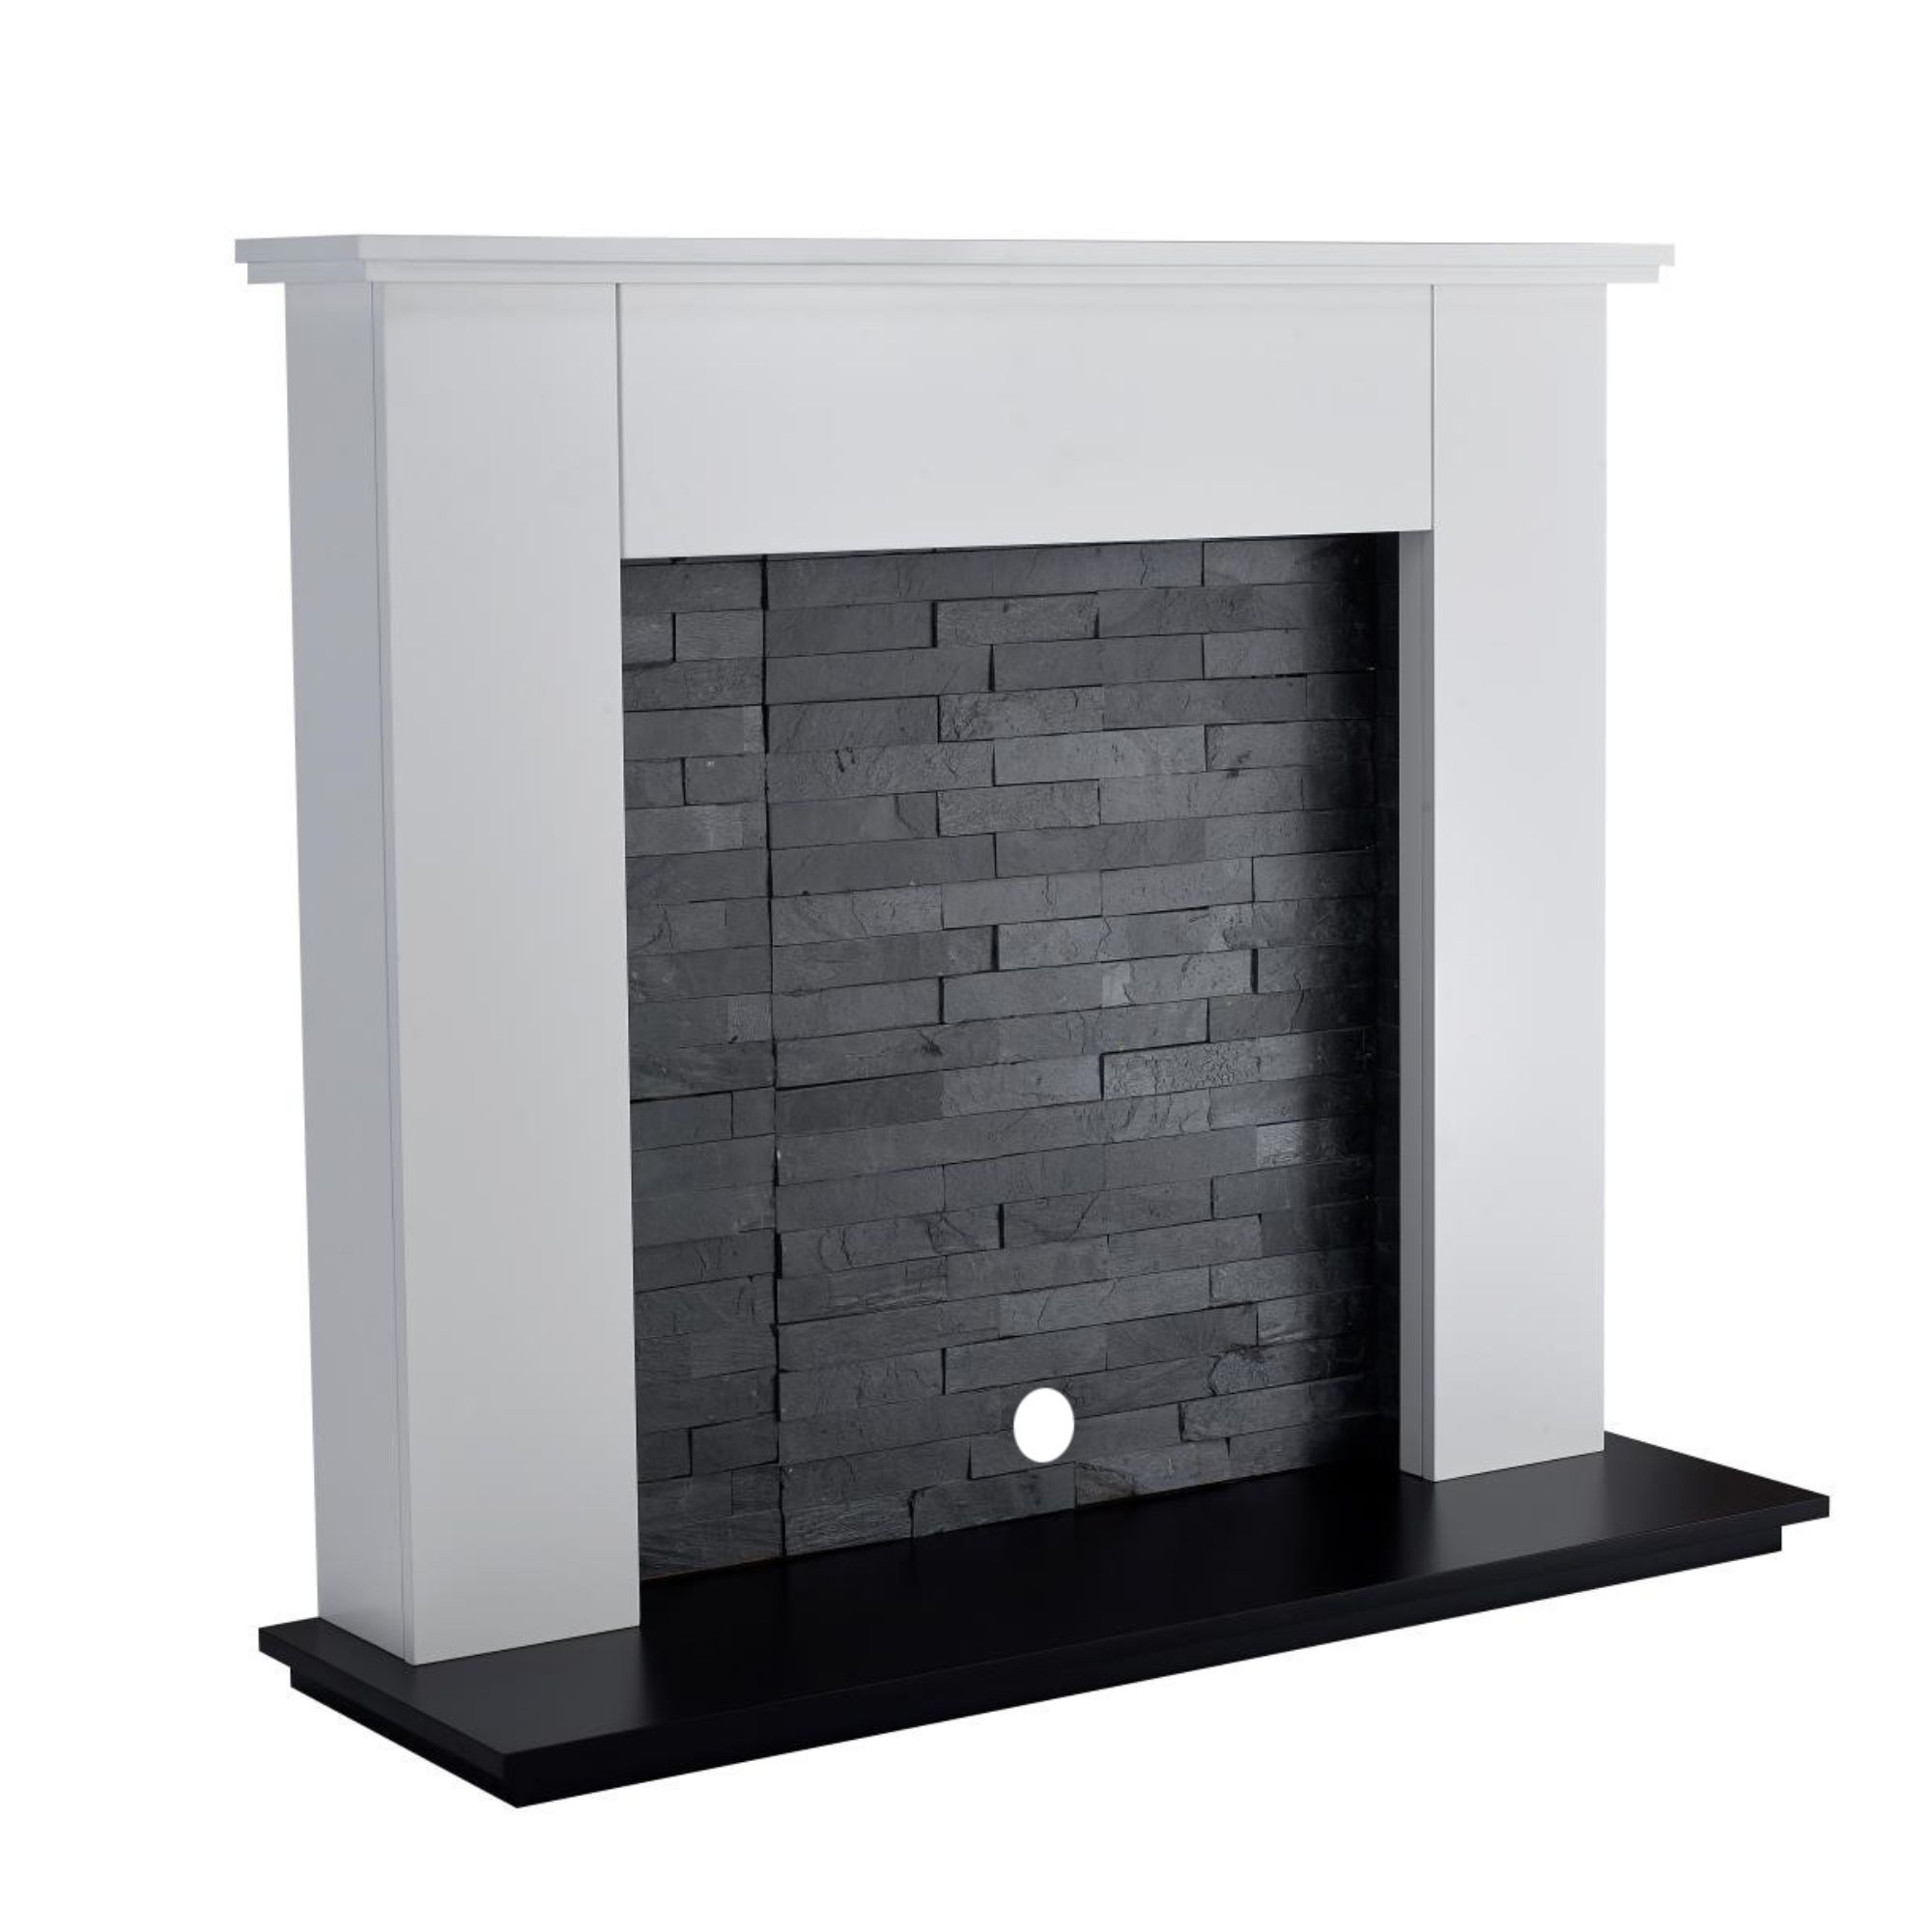 Focal Point Lashenden Slate White Fire surround set with Lights included